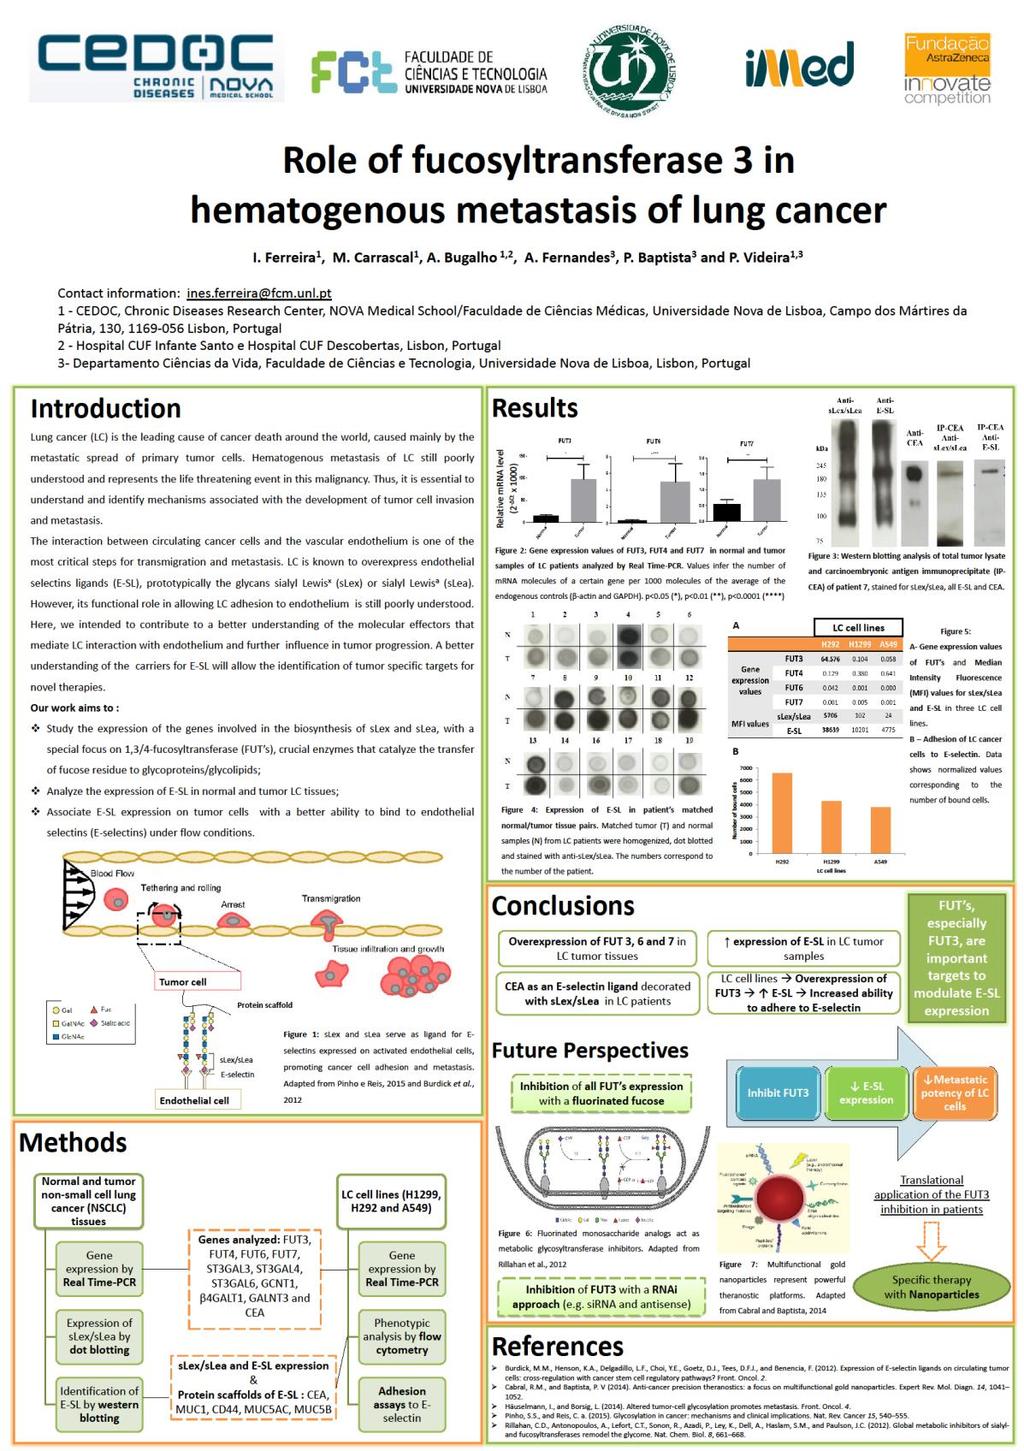 Appendix 6.7 - Poster presented at imed 7.